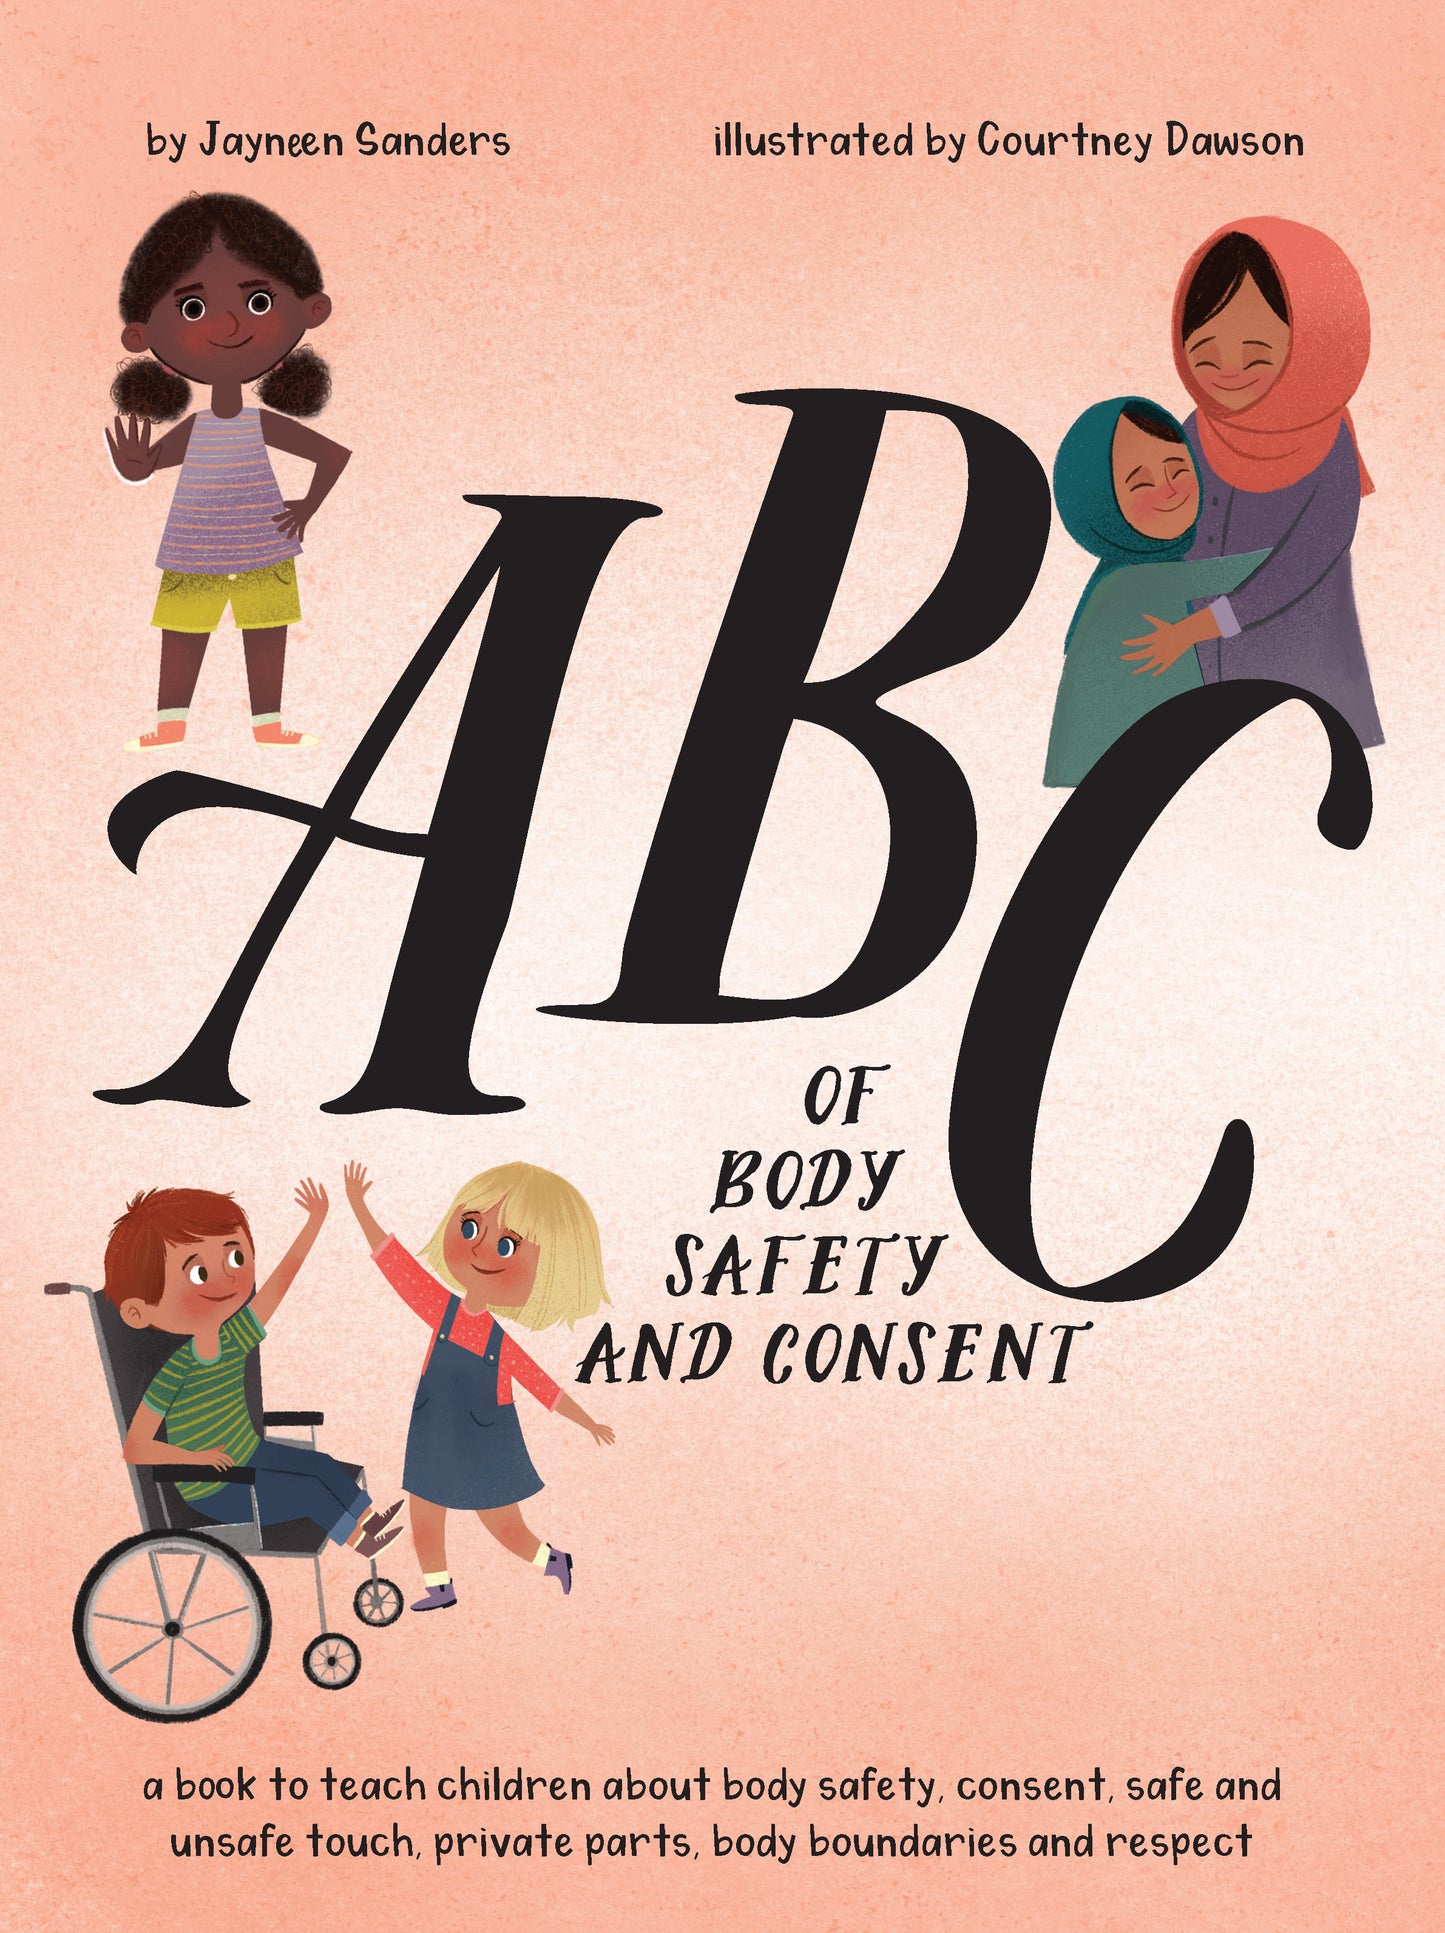 The cover of the book ‘ABC of Body Safety and Consent’ by Jayneen Sanders.